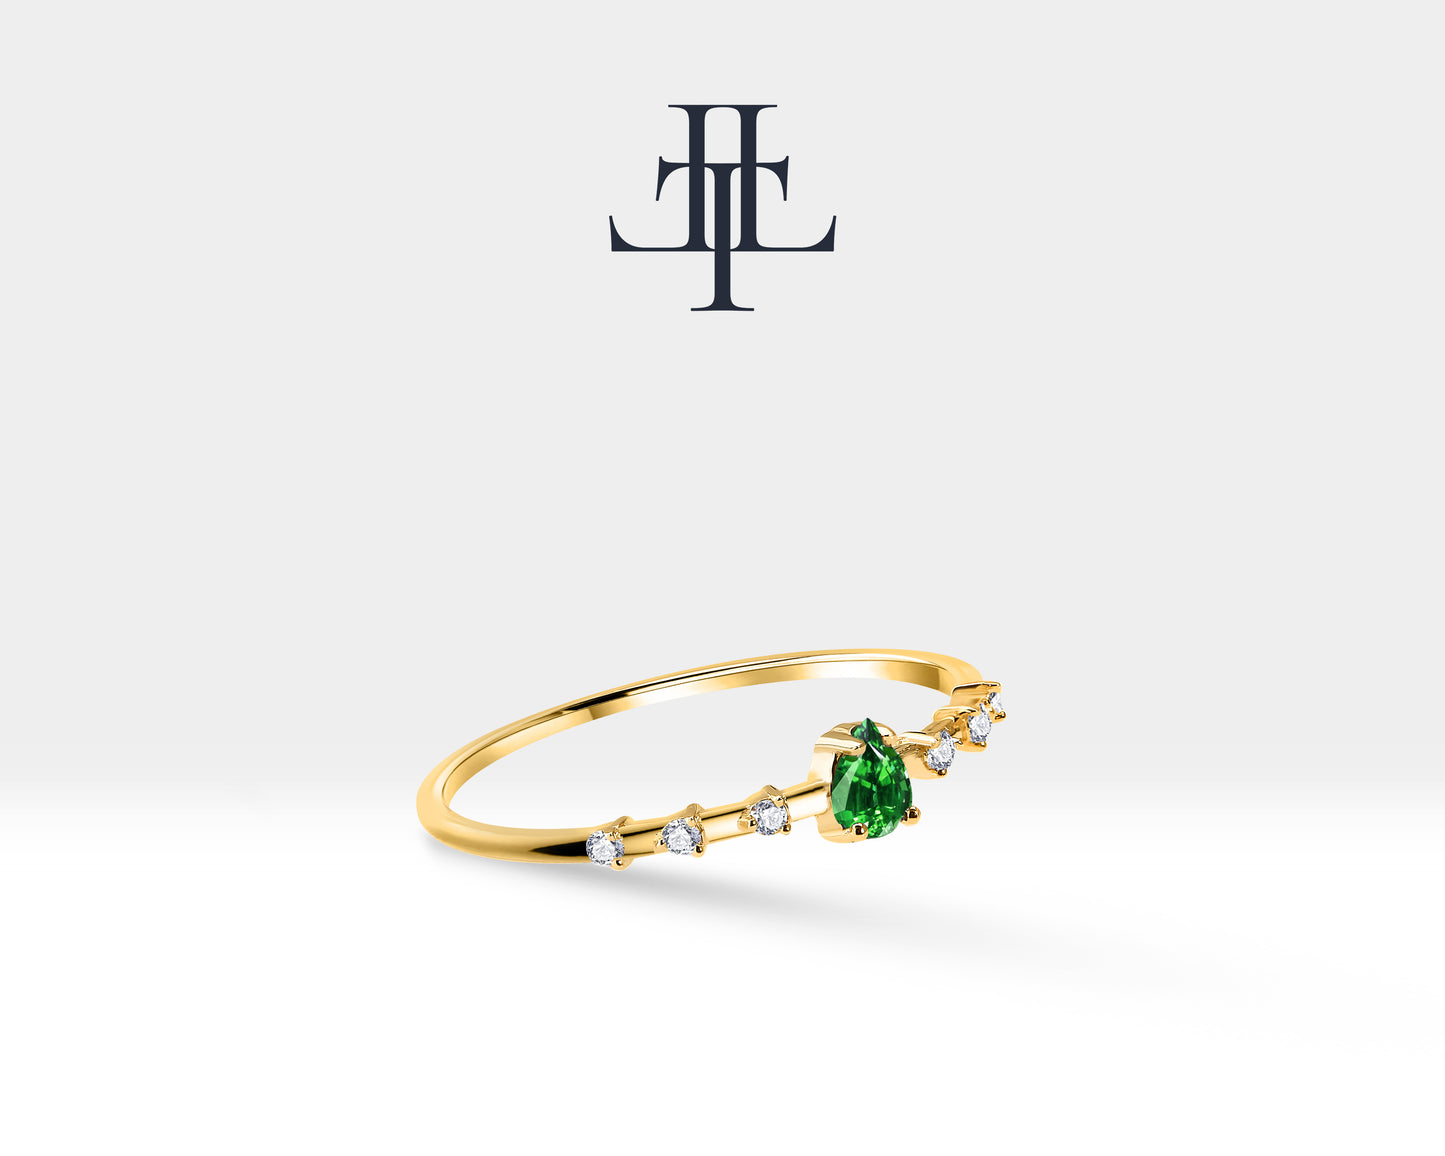 14K Solitaire Gold Ring,Engagement Ring,Pear Cut Emerald Ring,Tiny Diamond Ring